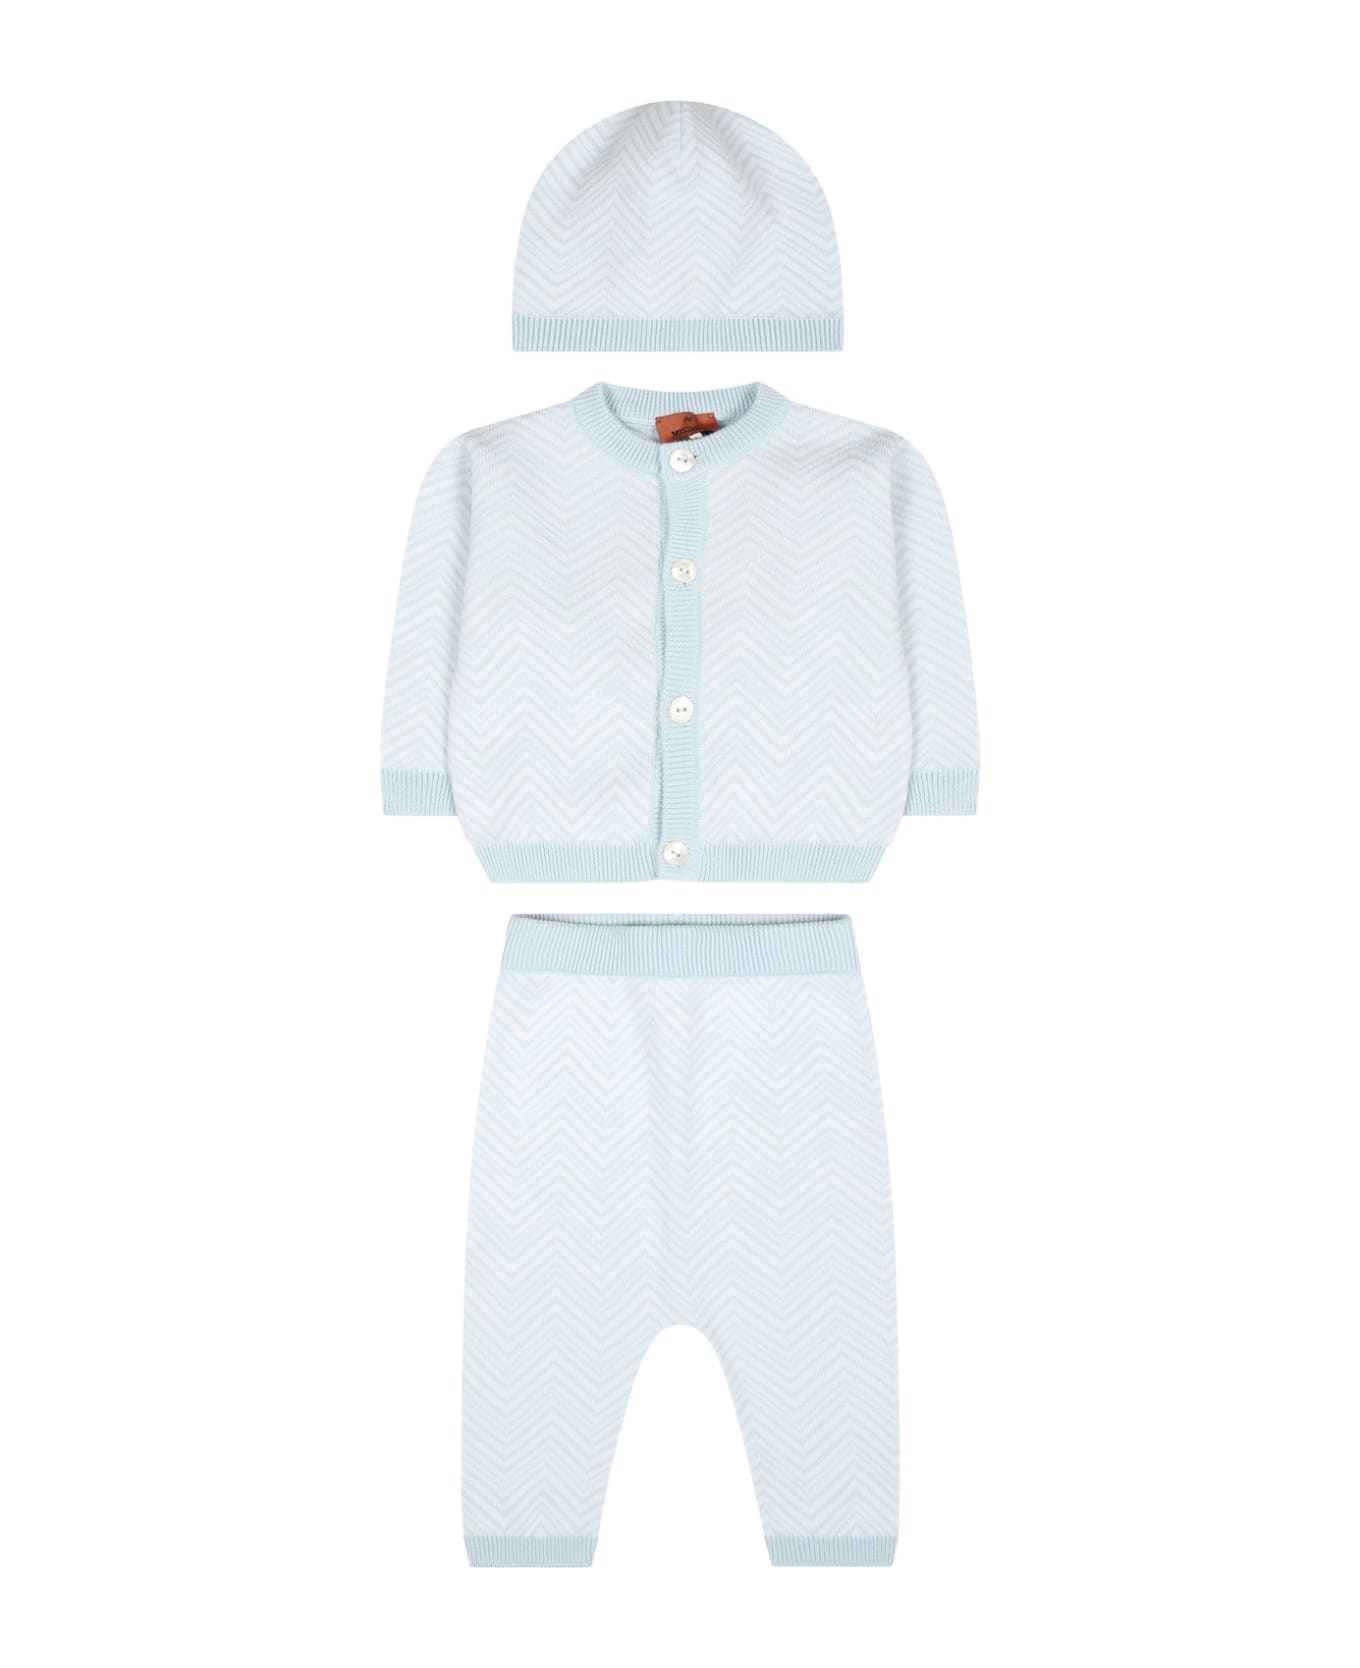 Missoni Sky Blue Birth Suit For Baby Boy With Chevron Pattern - Light Blue